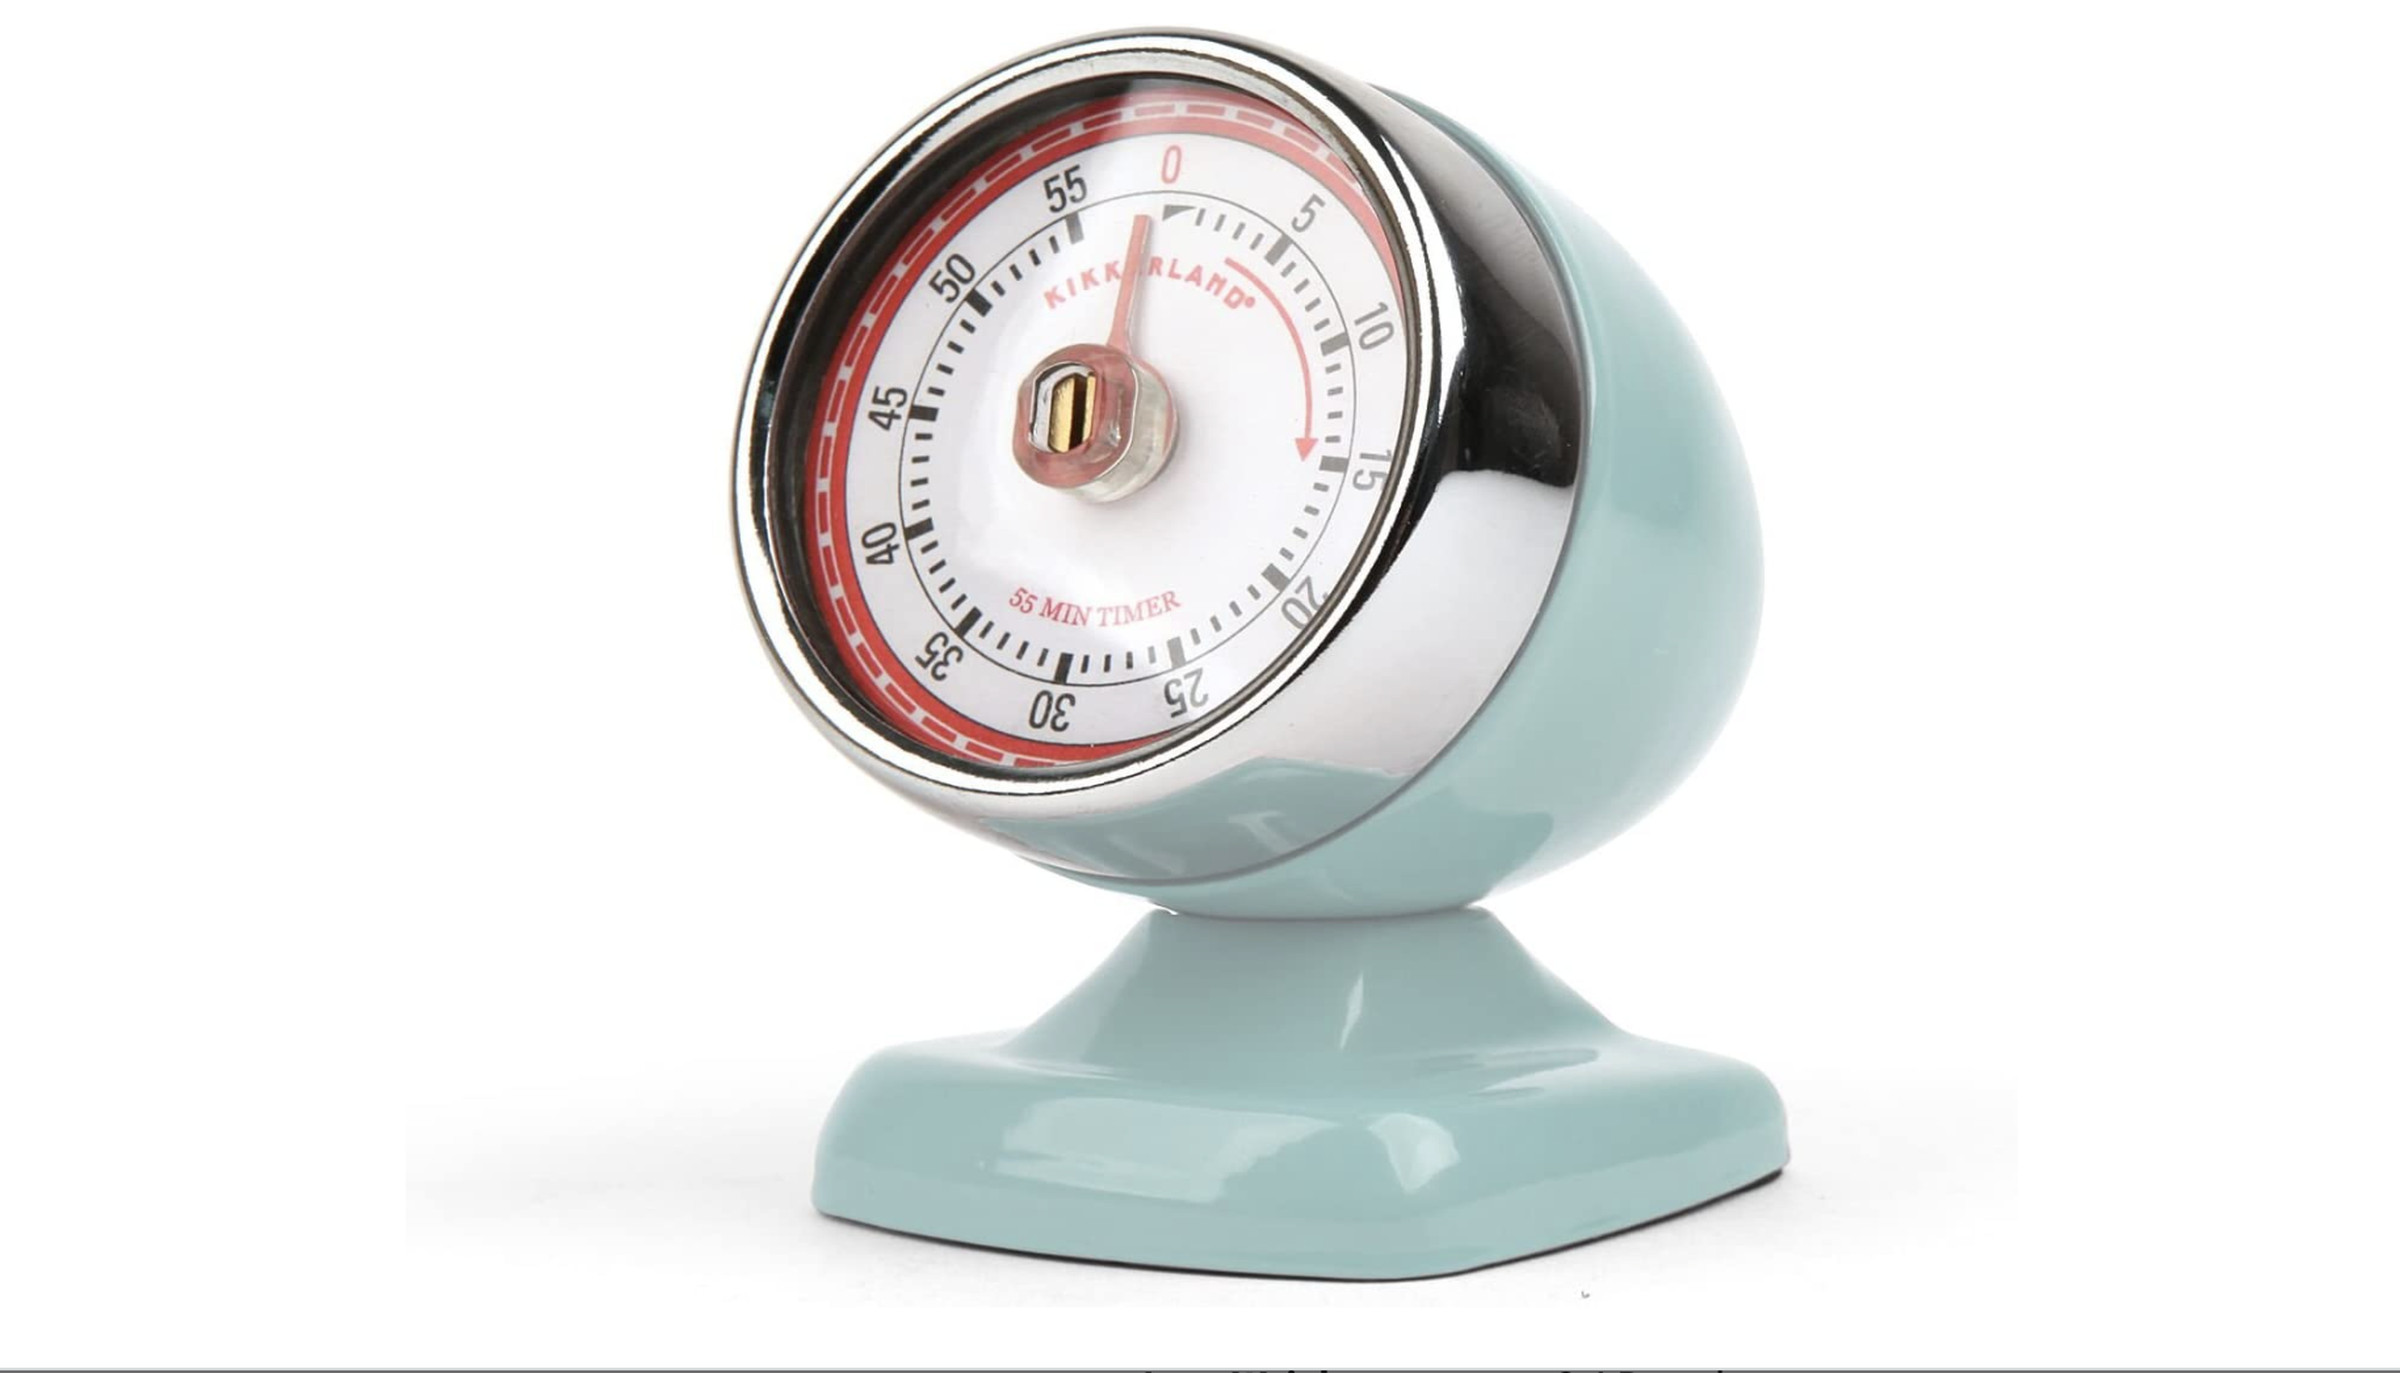 Old-fashioned kitchen timer in blue / green.